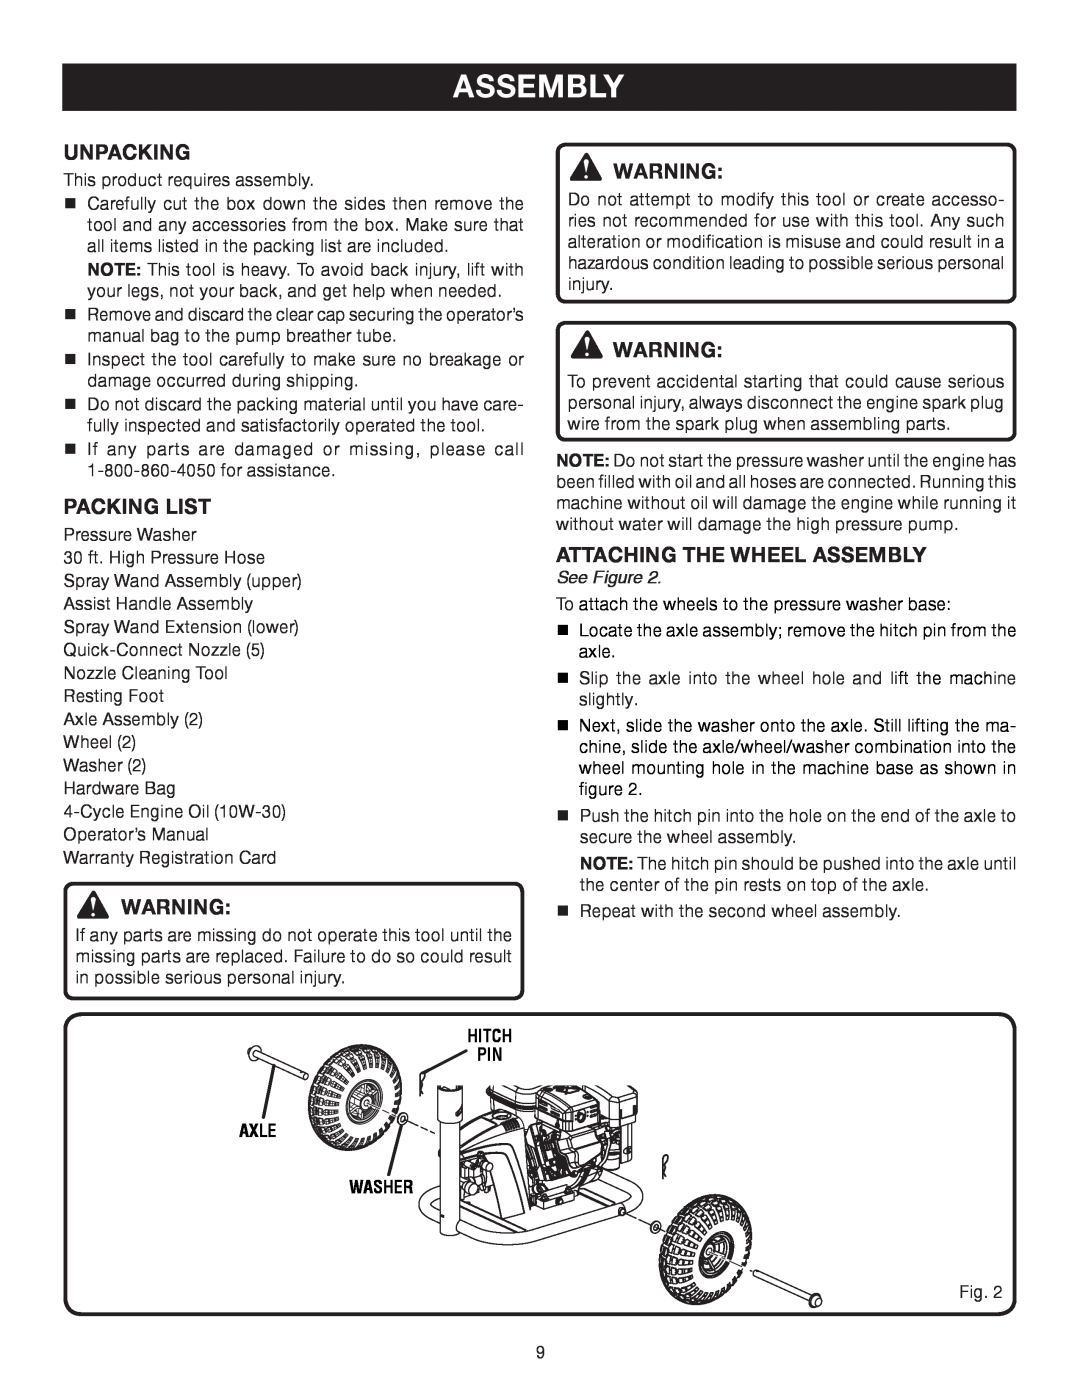 Ryobi Outdoor RY80030 manual Unpacking, Packing List, Attaching The Wheel Assembly, Hitch Pin Axle Washer, See Figure 